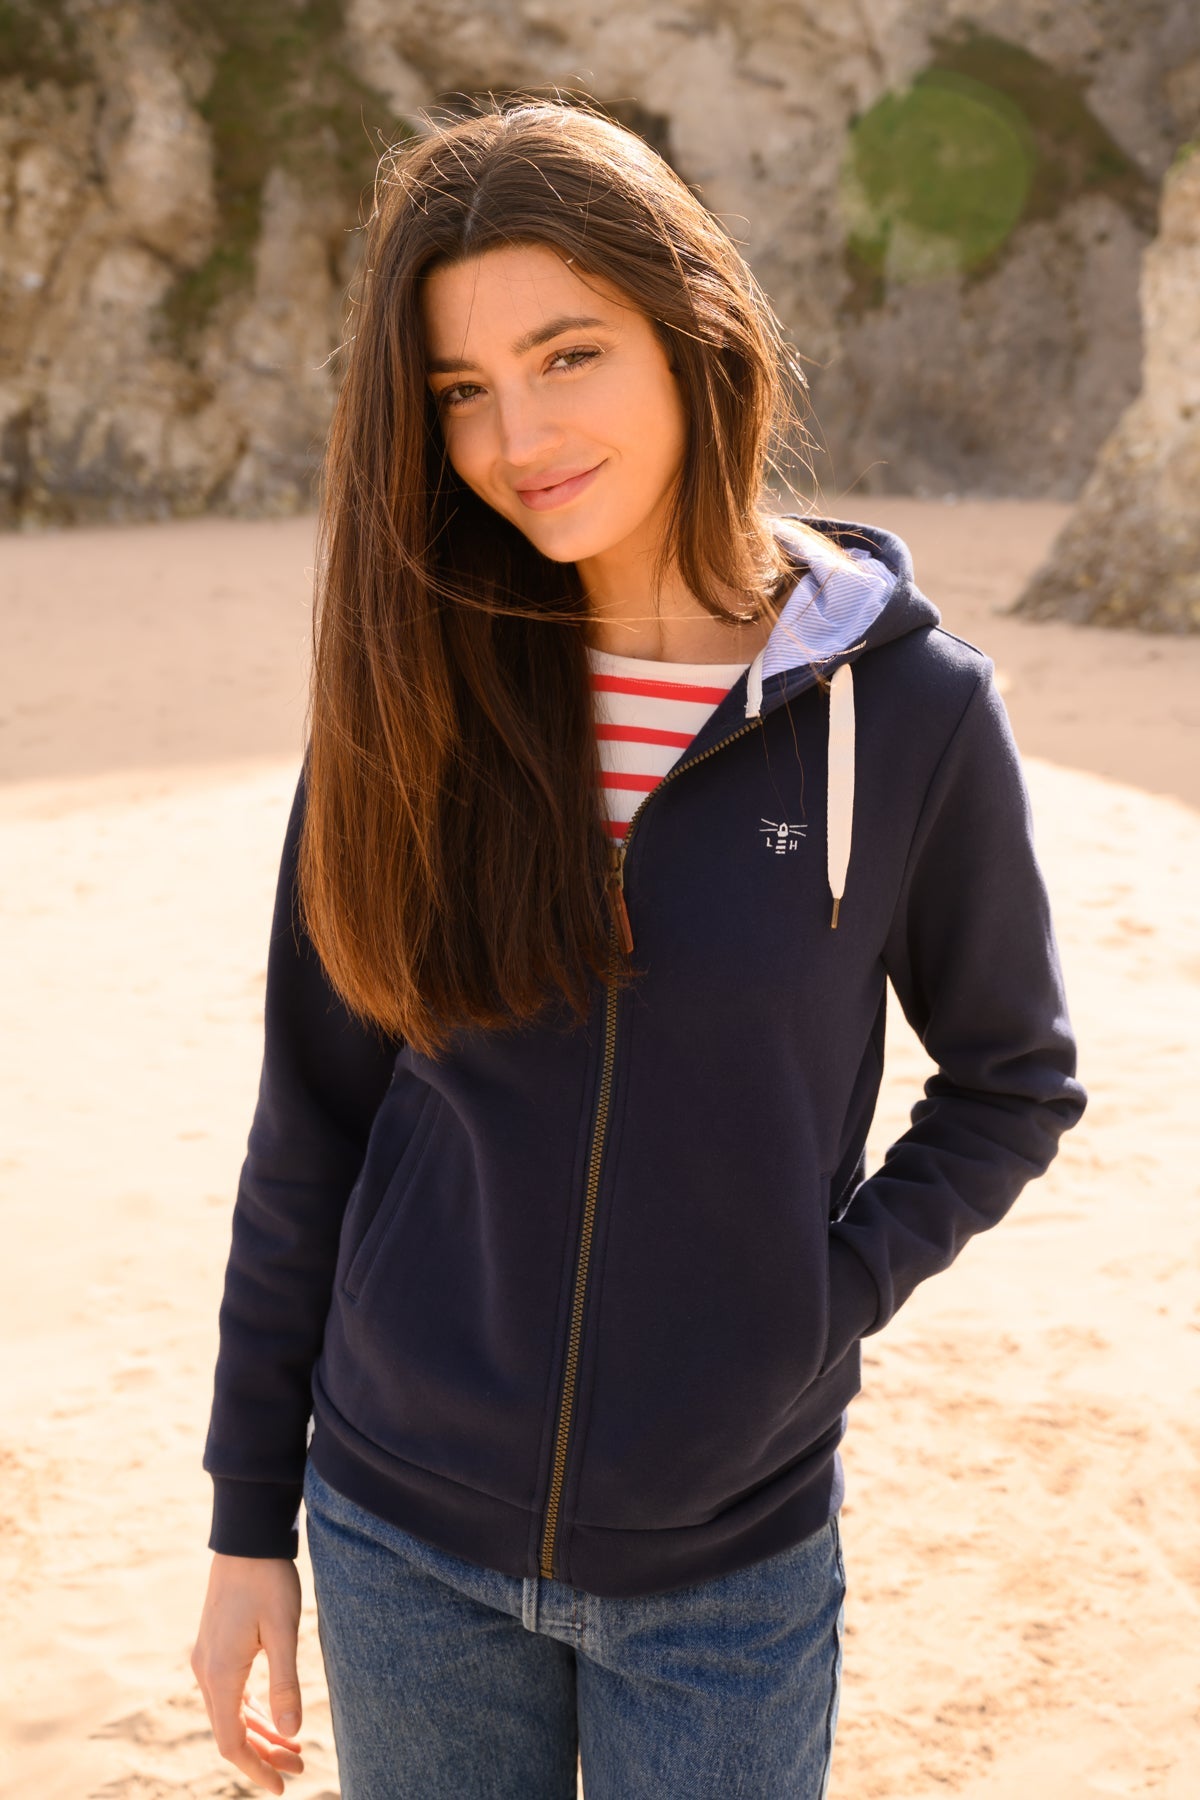 Strand Hooded Top - Navy - Lighthouse